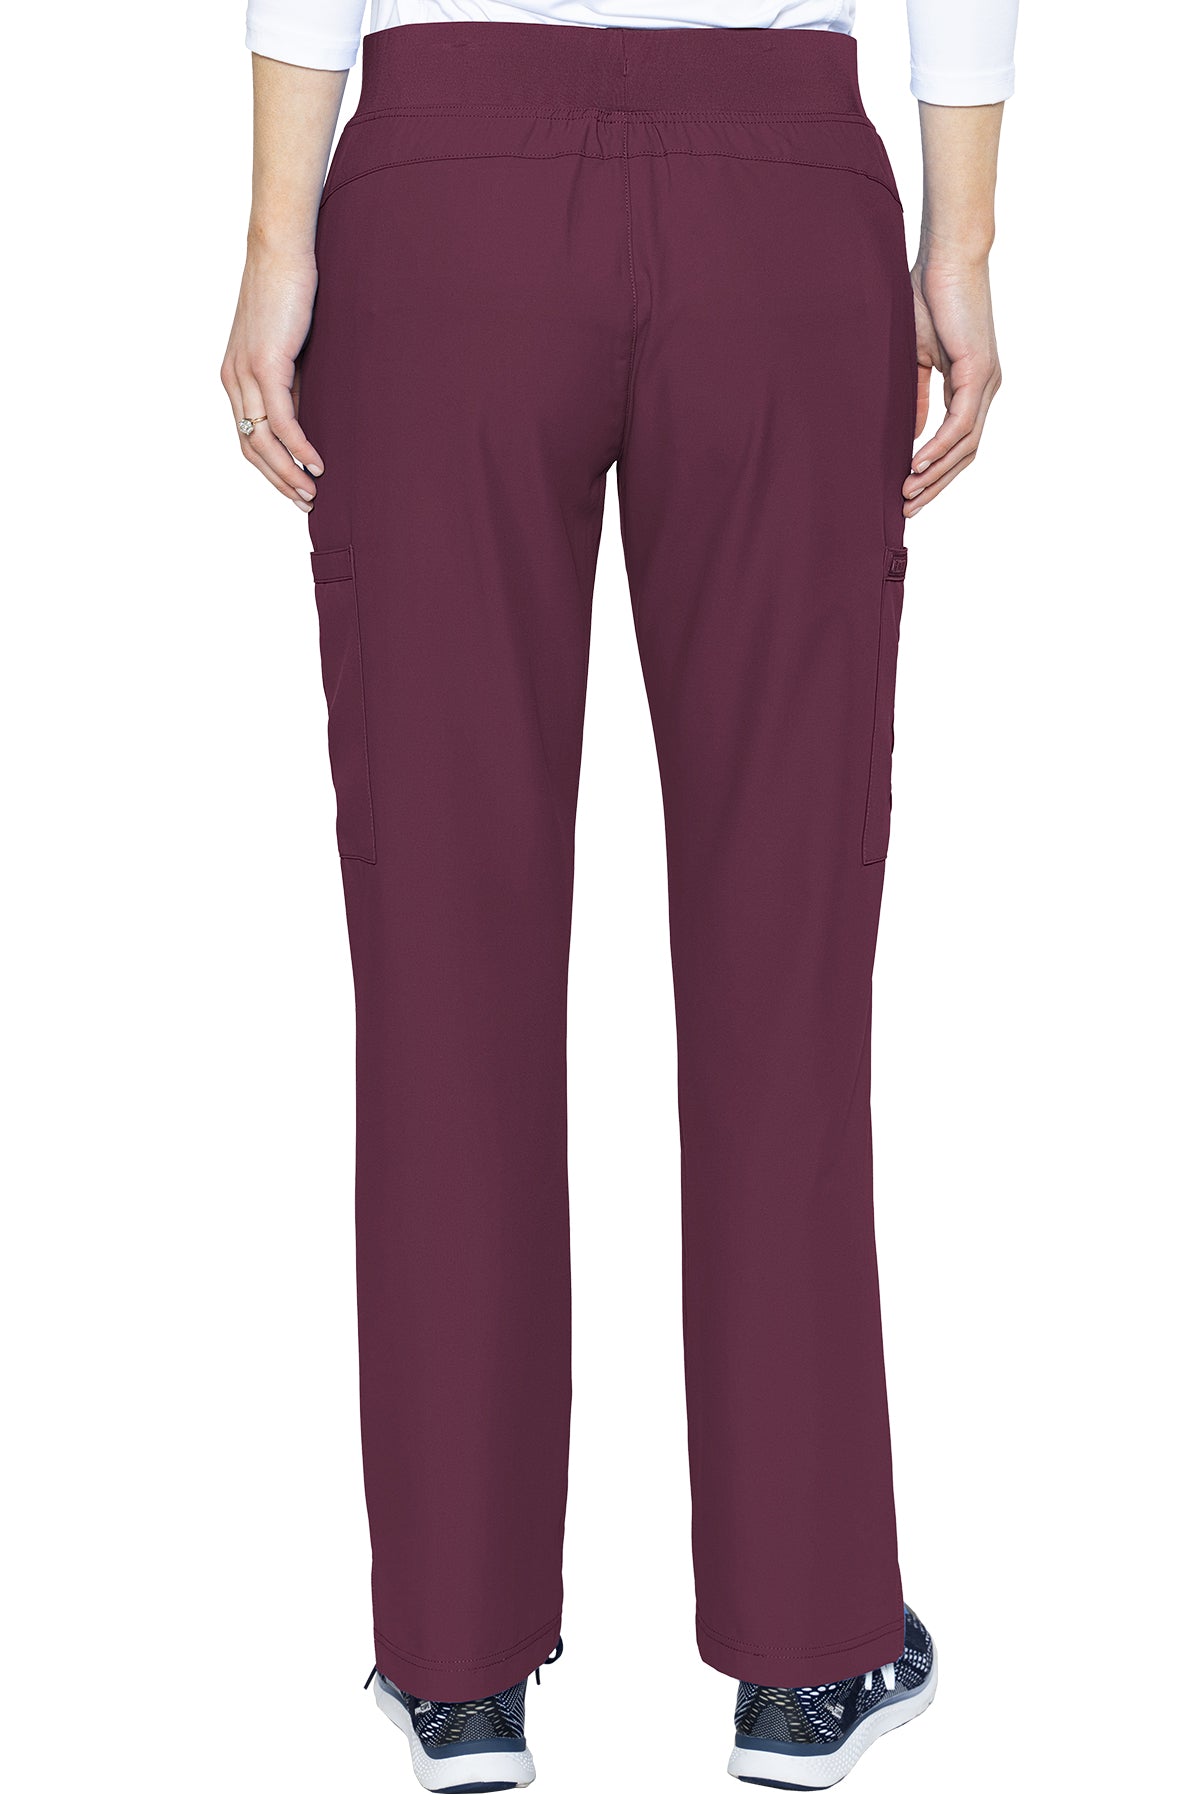 Med Couture 2702 Insight Women's Zipper Pocket Pant - TALL wine back 